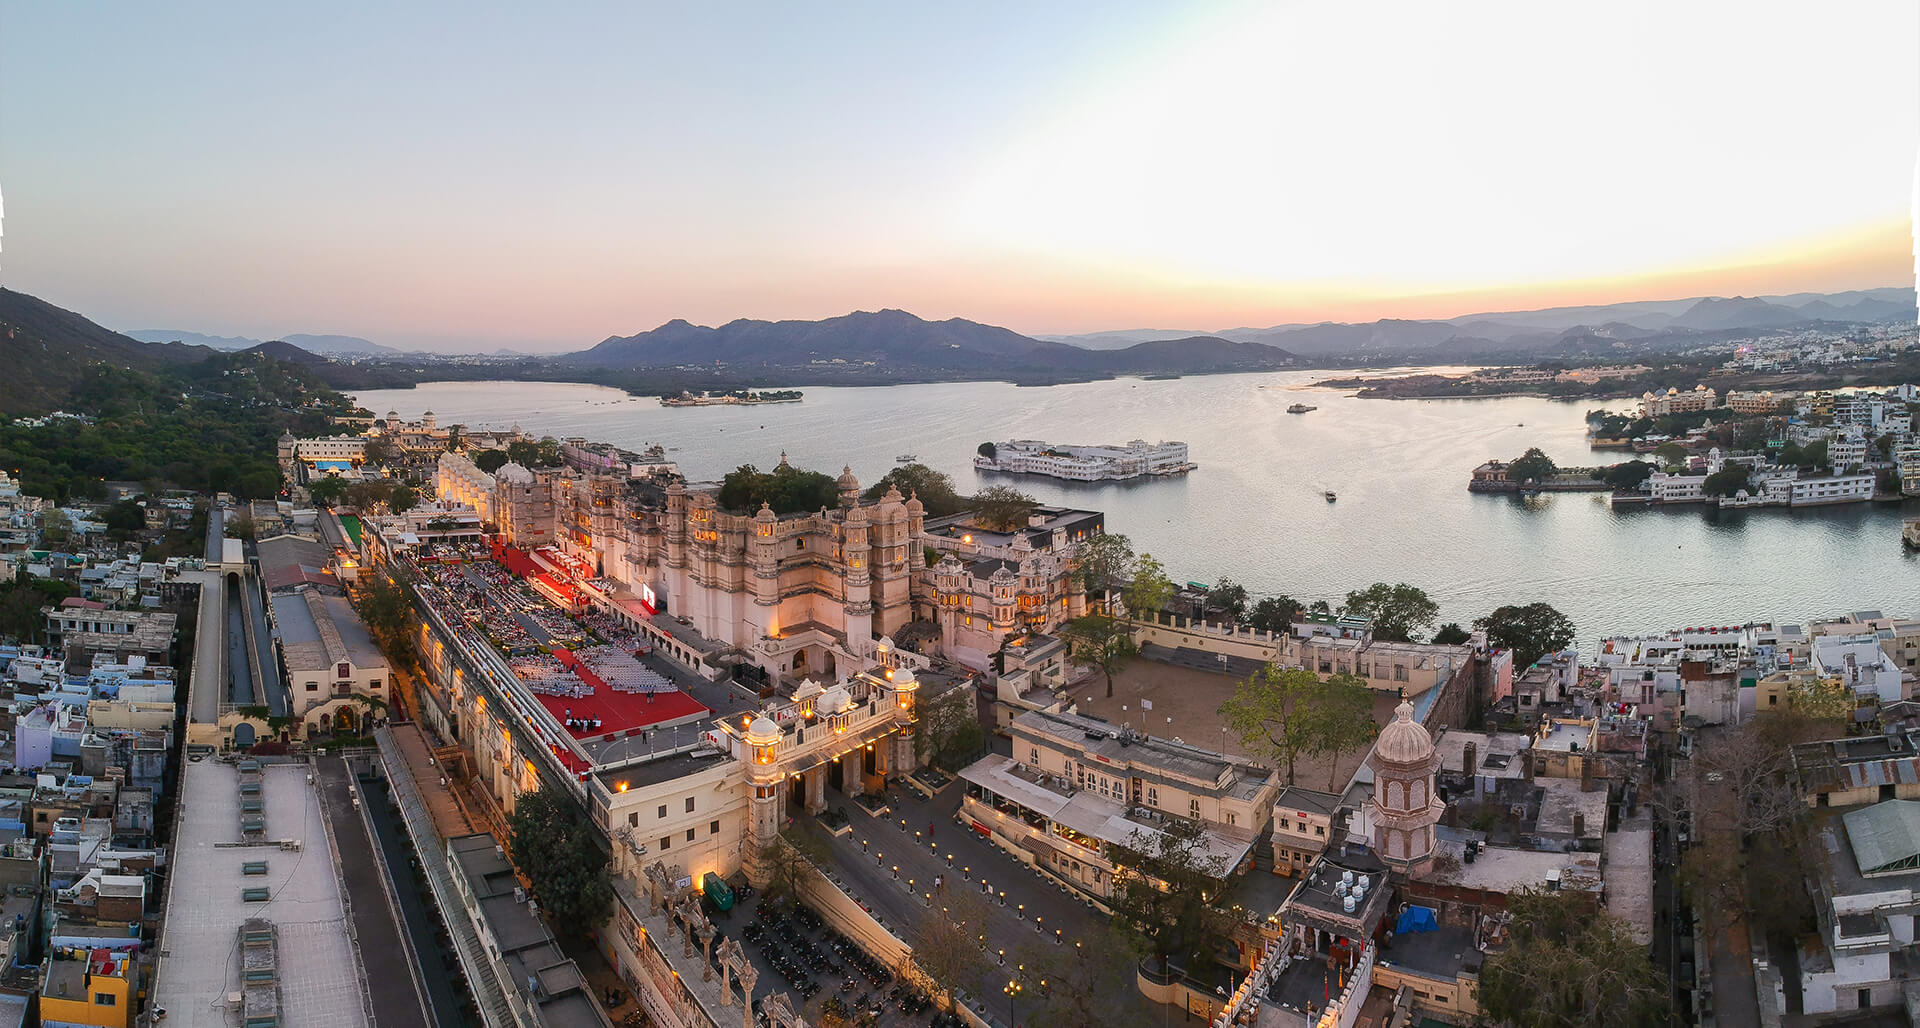 City of Udaipur